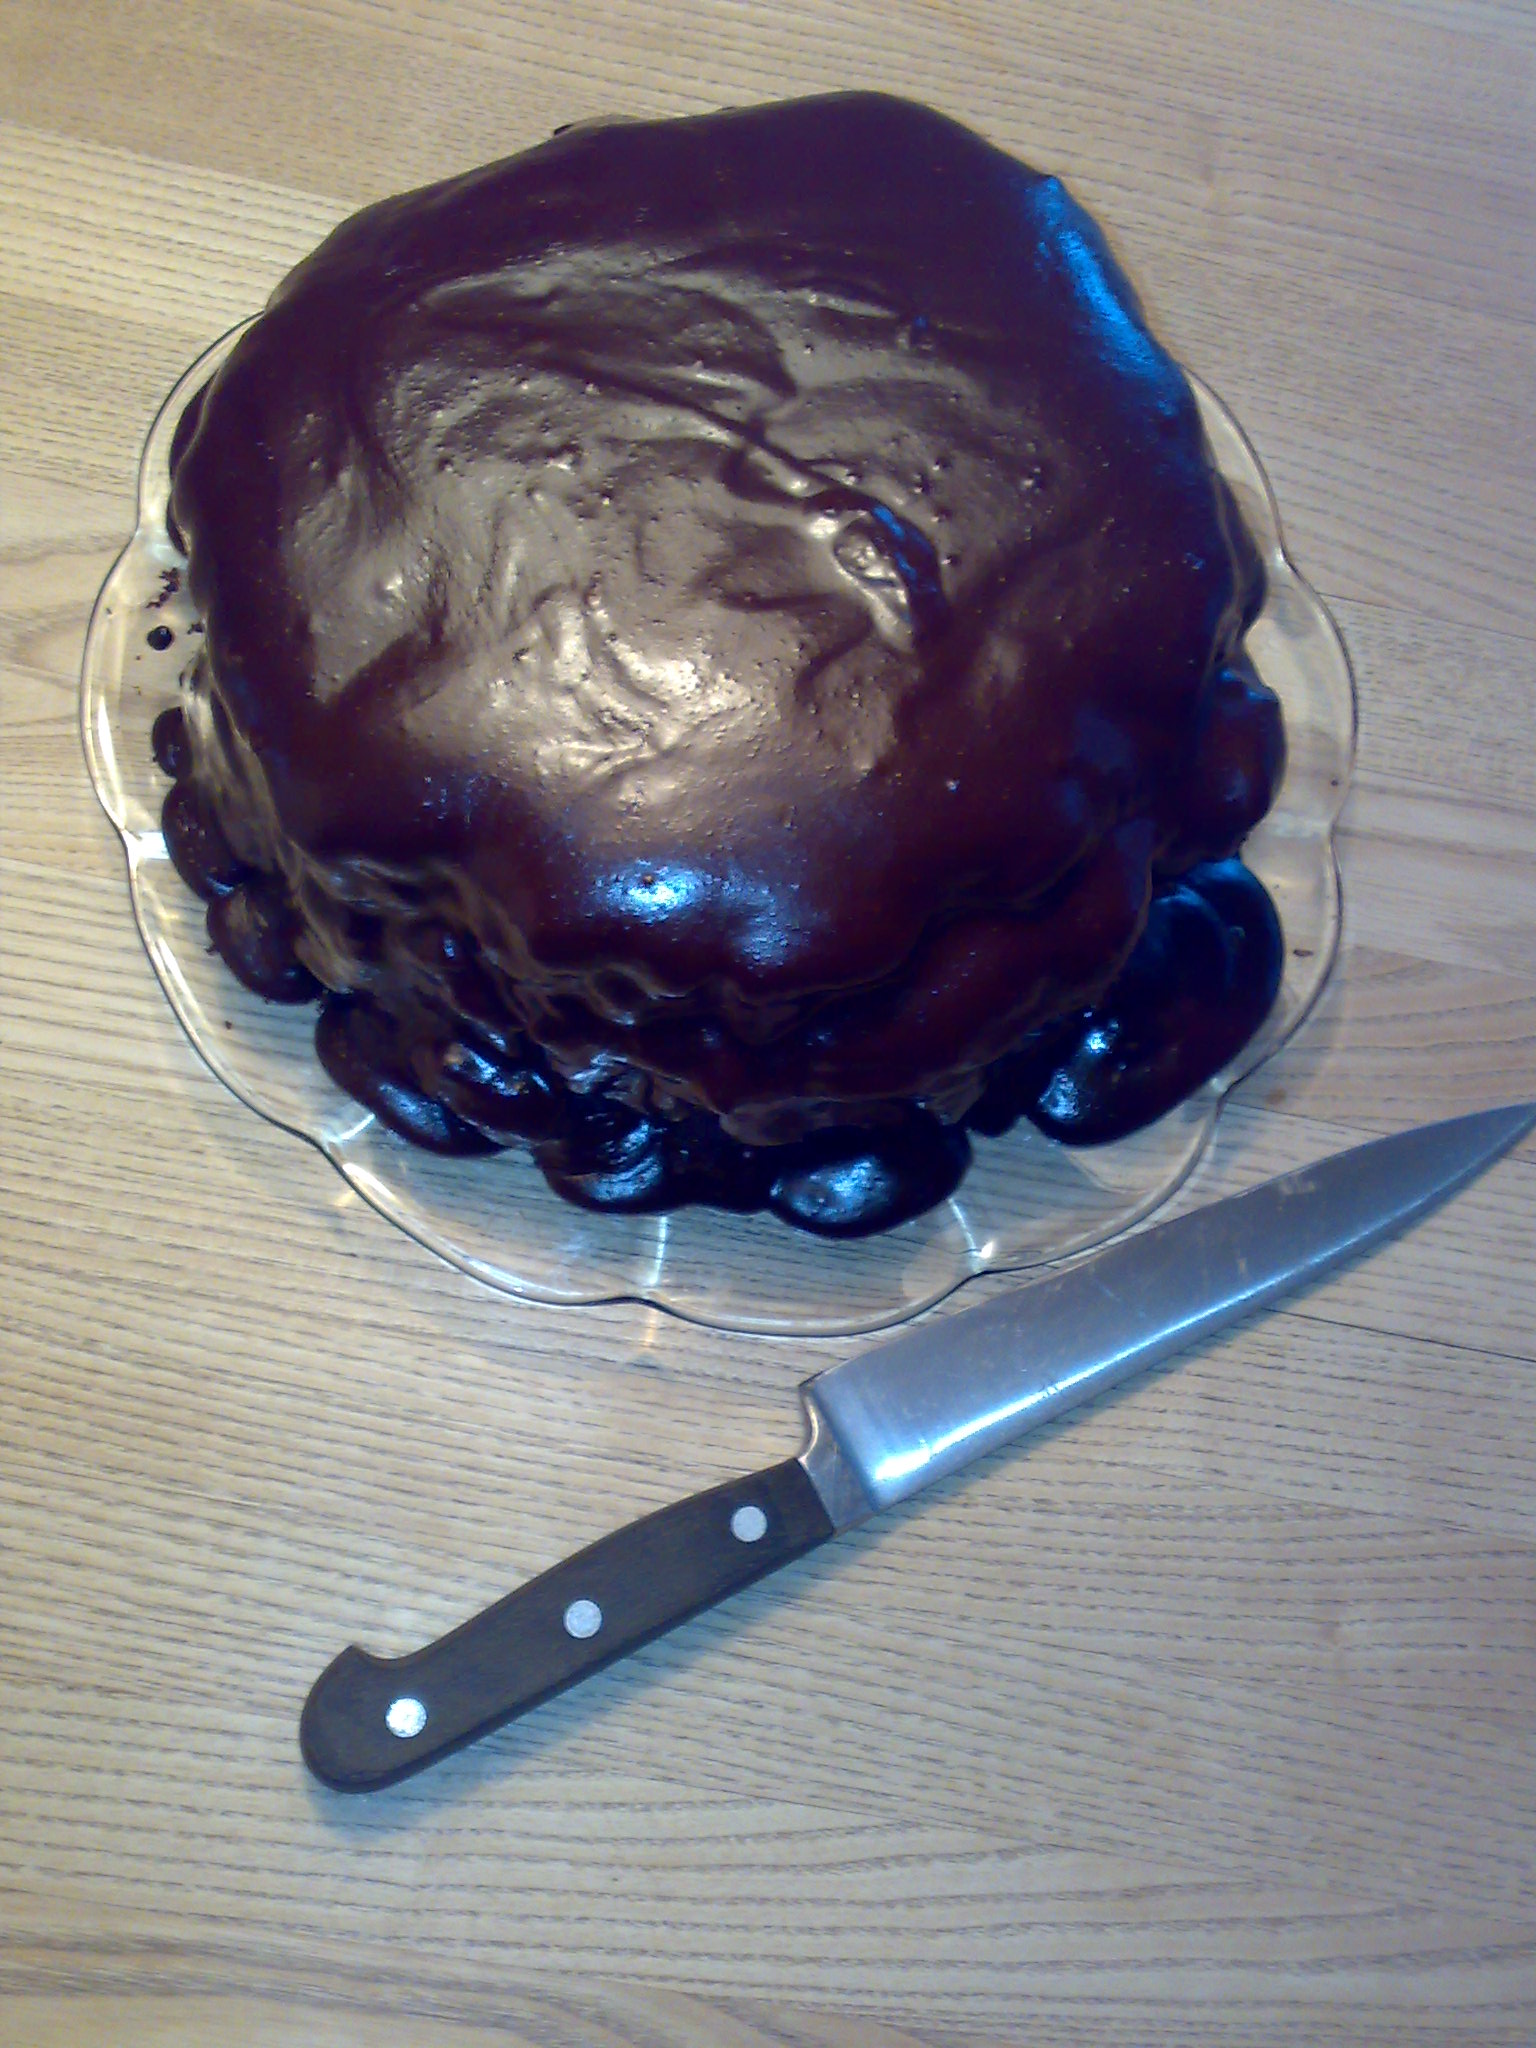 a chocolate cake sitting on top of a plate with a knife